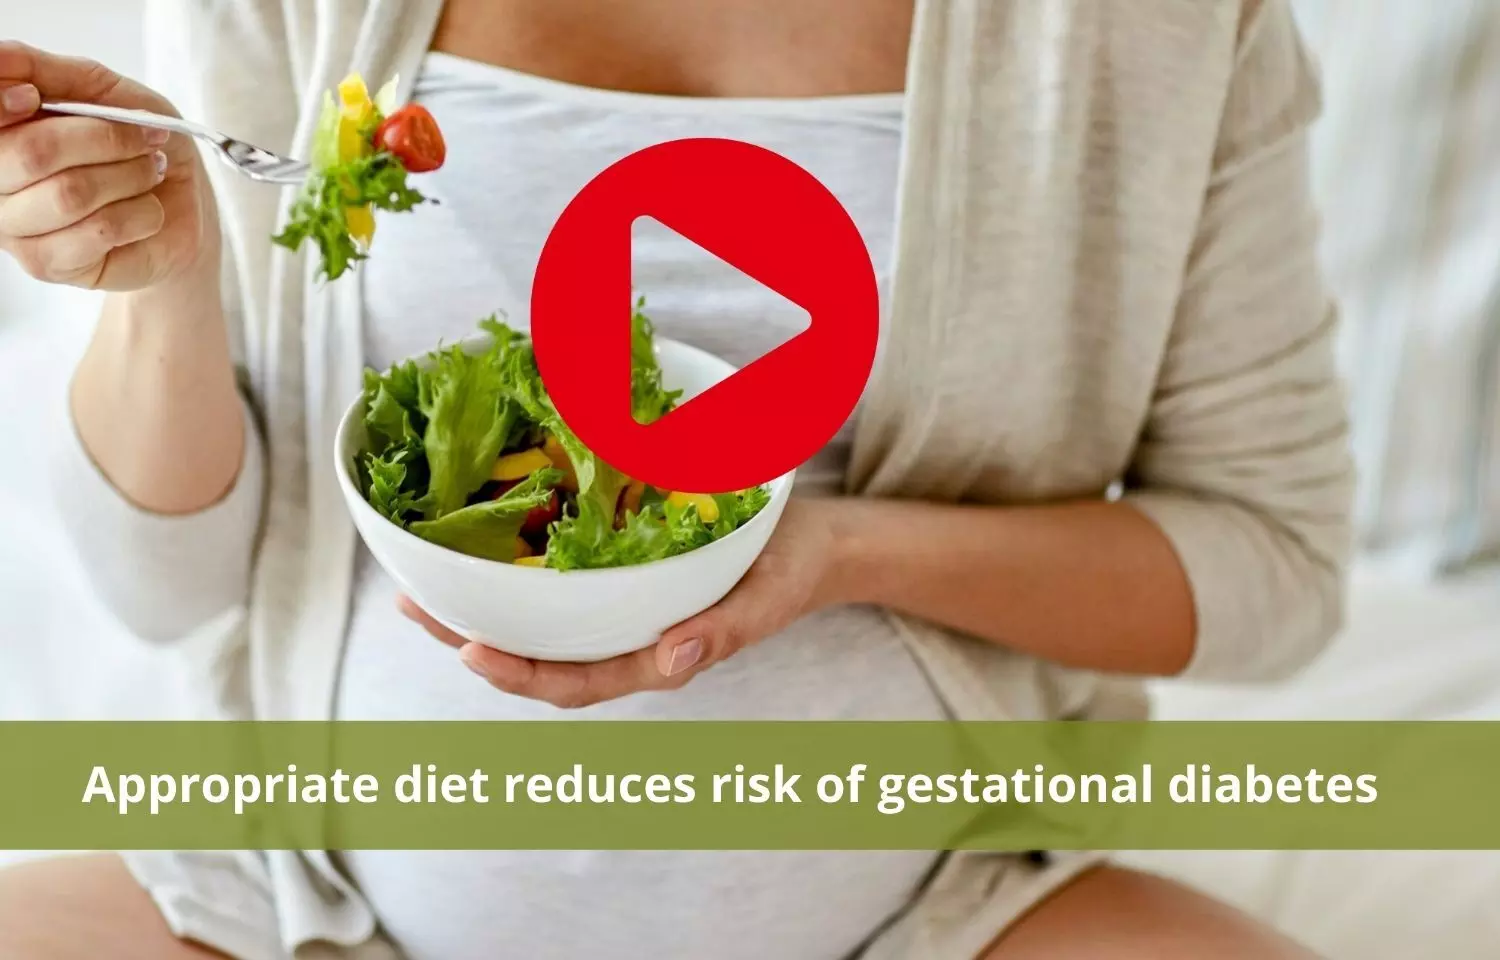 Proper maintained diet to reduce risk of gestational diabetes